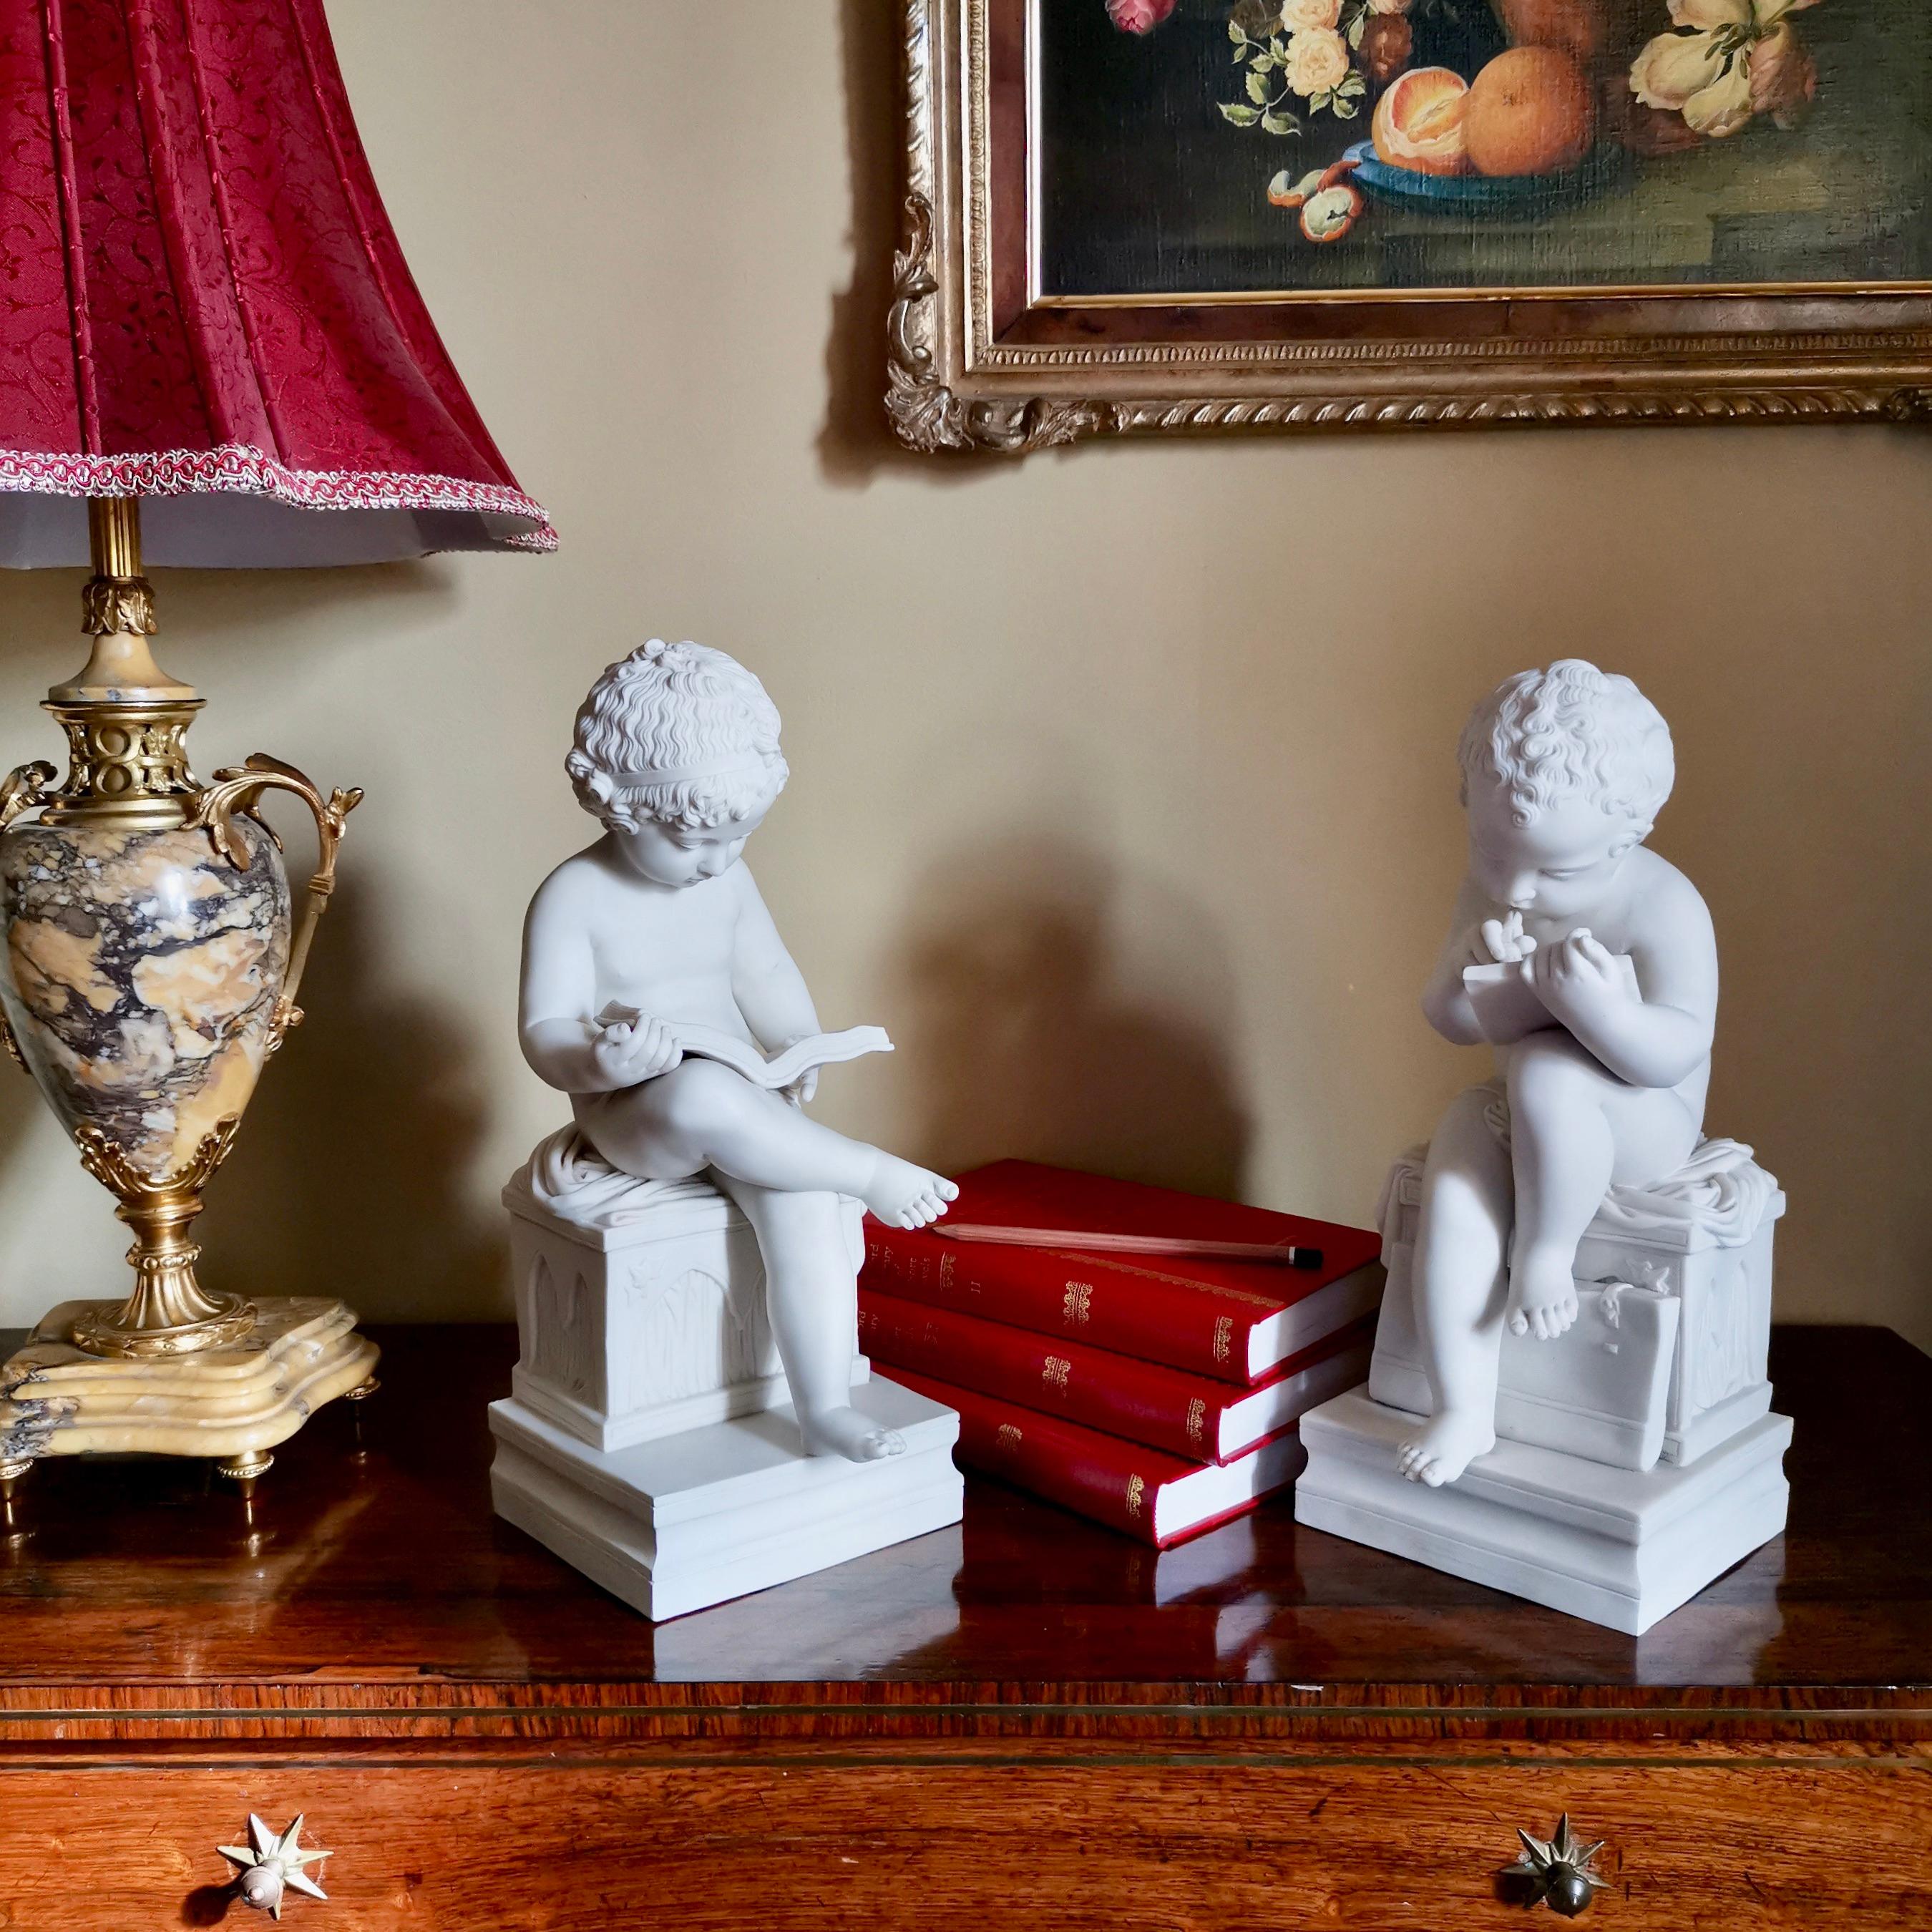 On offer is a superb pair of white parian figures, probably English and made in Staffordshire in the late 19th Century. The figures are after a pair of bronze models created by Charles-Gabriel Sauvage, also called Lemire, in about 1795. They